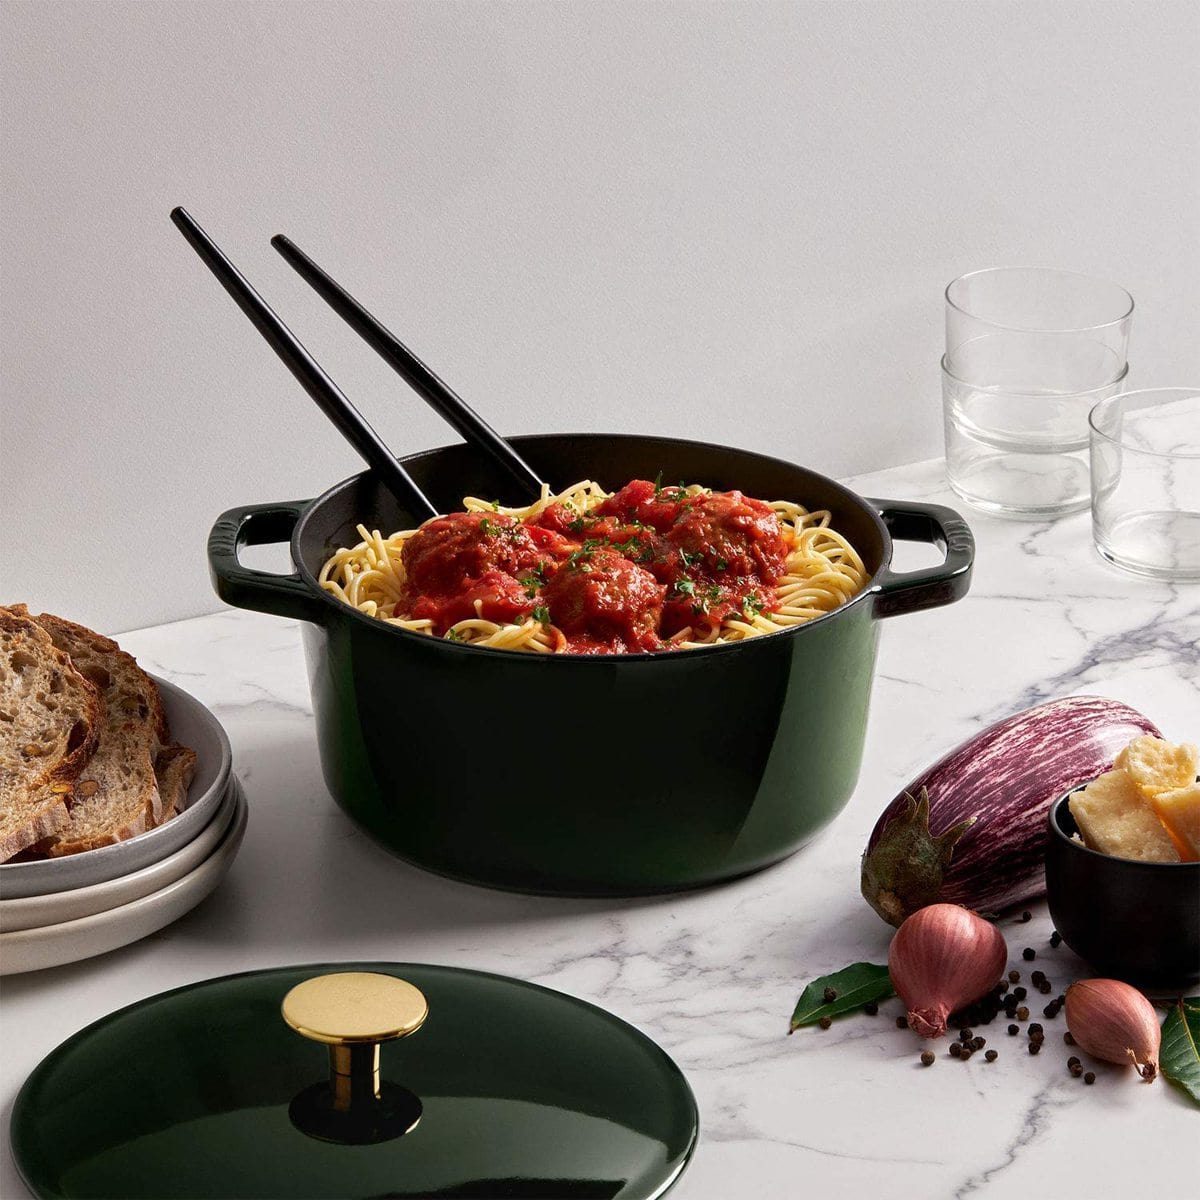 Green cast iron Dutch oven filled with spaghetti